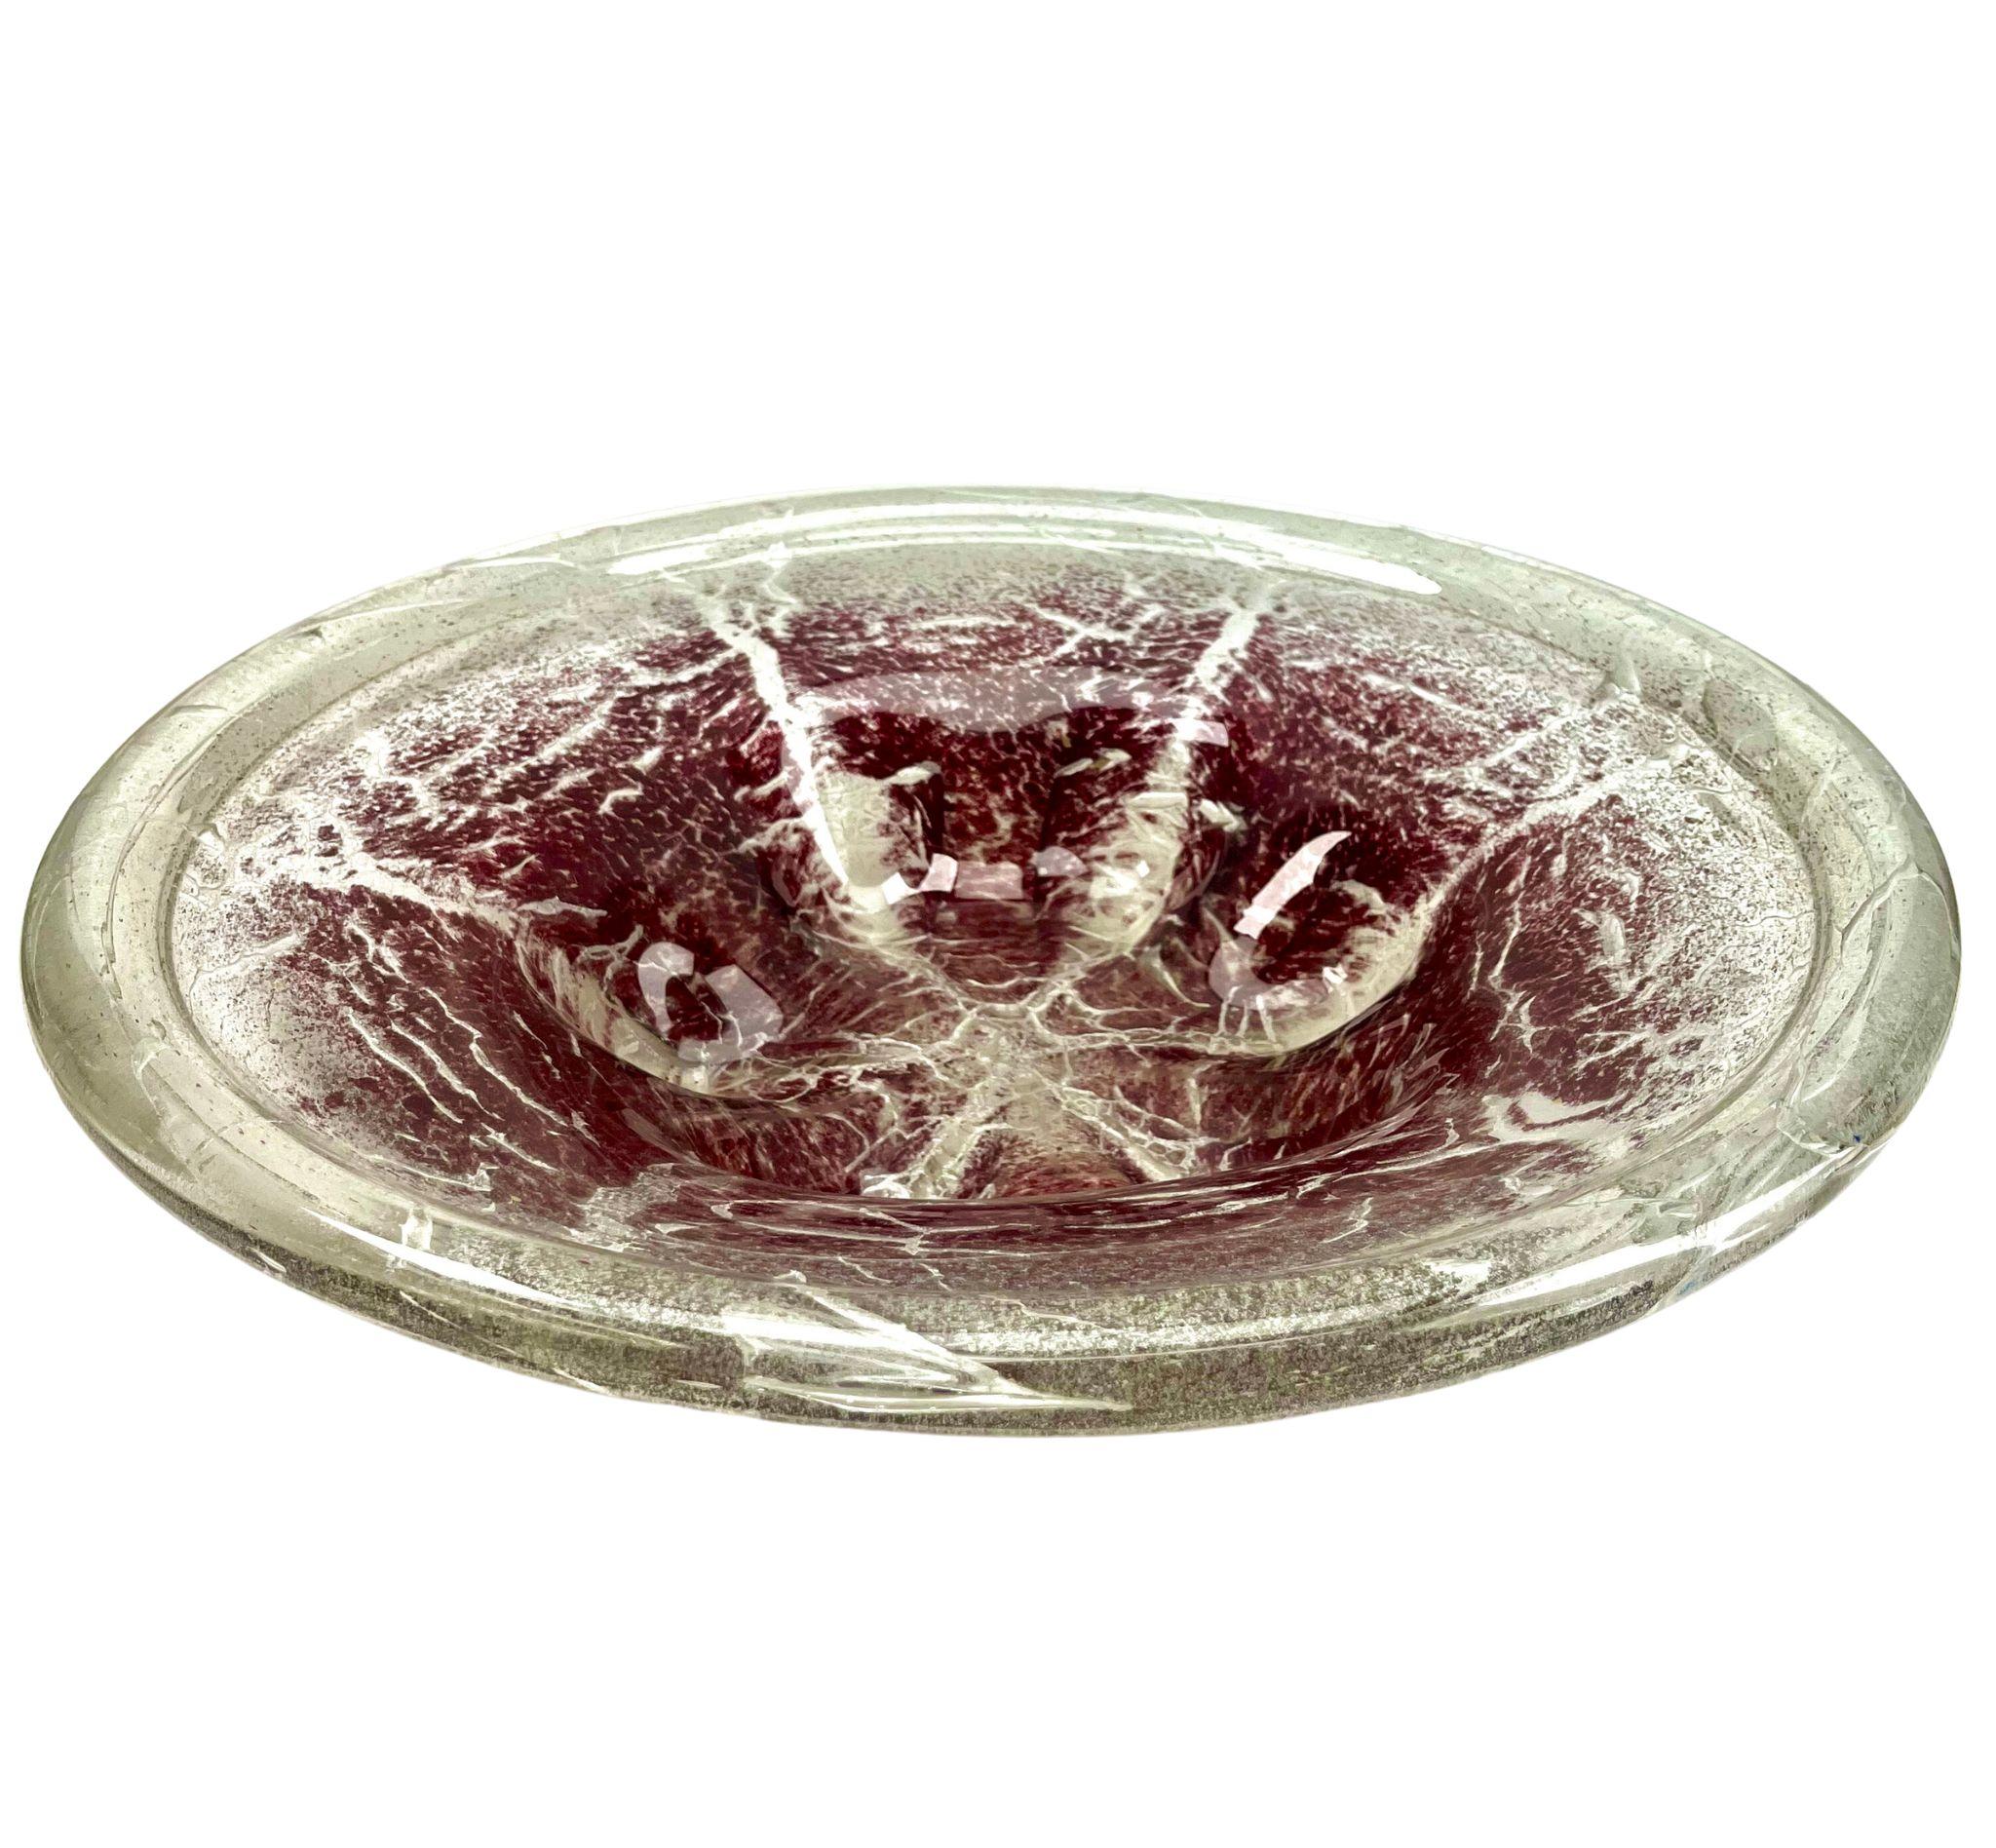 Hand-Crafted Large'Ikora' Art Glass Bowl, Produced, by WMF in Germany, 1930s by Karl Wiedmann For Sale